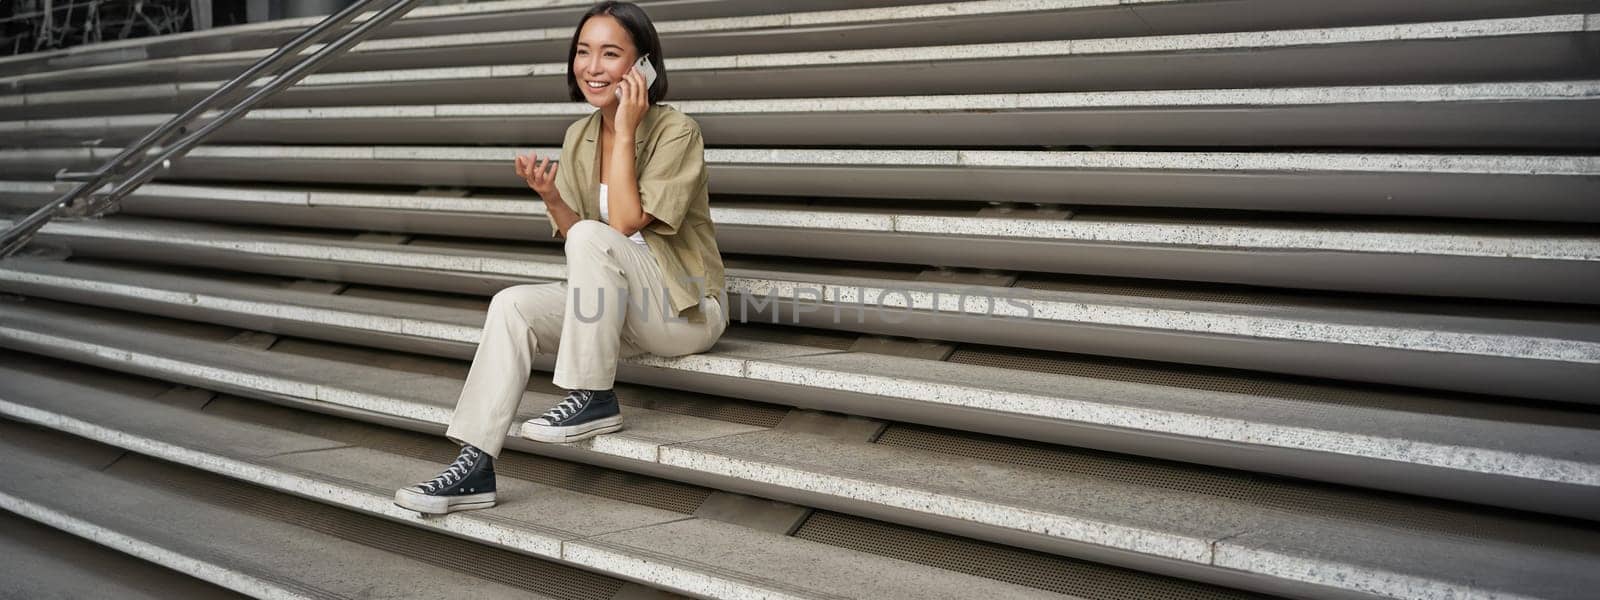 Smiling asian girl sits on stairs of building and talks on mobile phone, relaxing during telephone conversation.